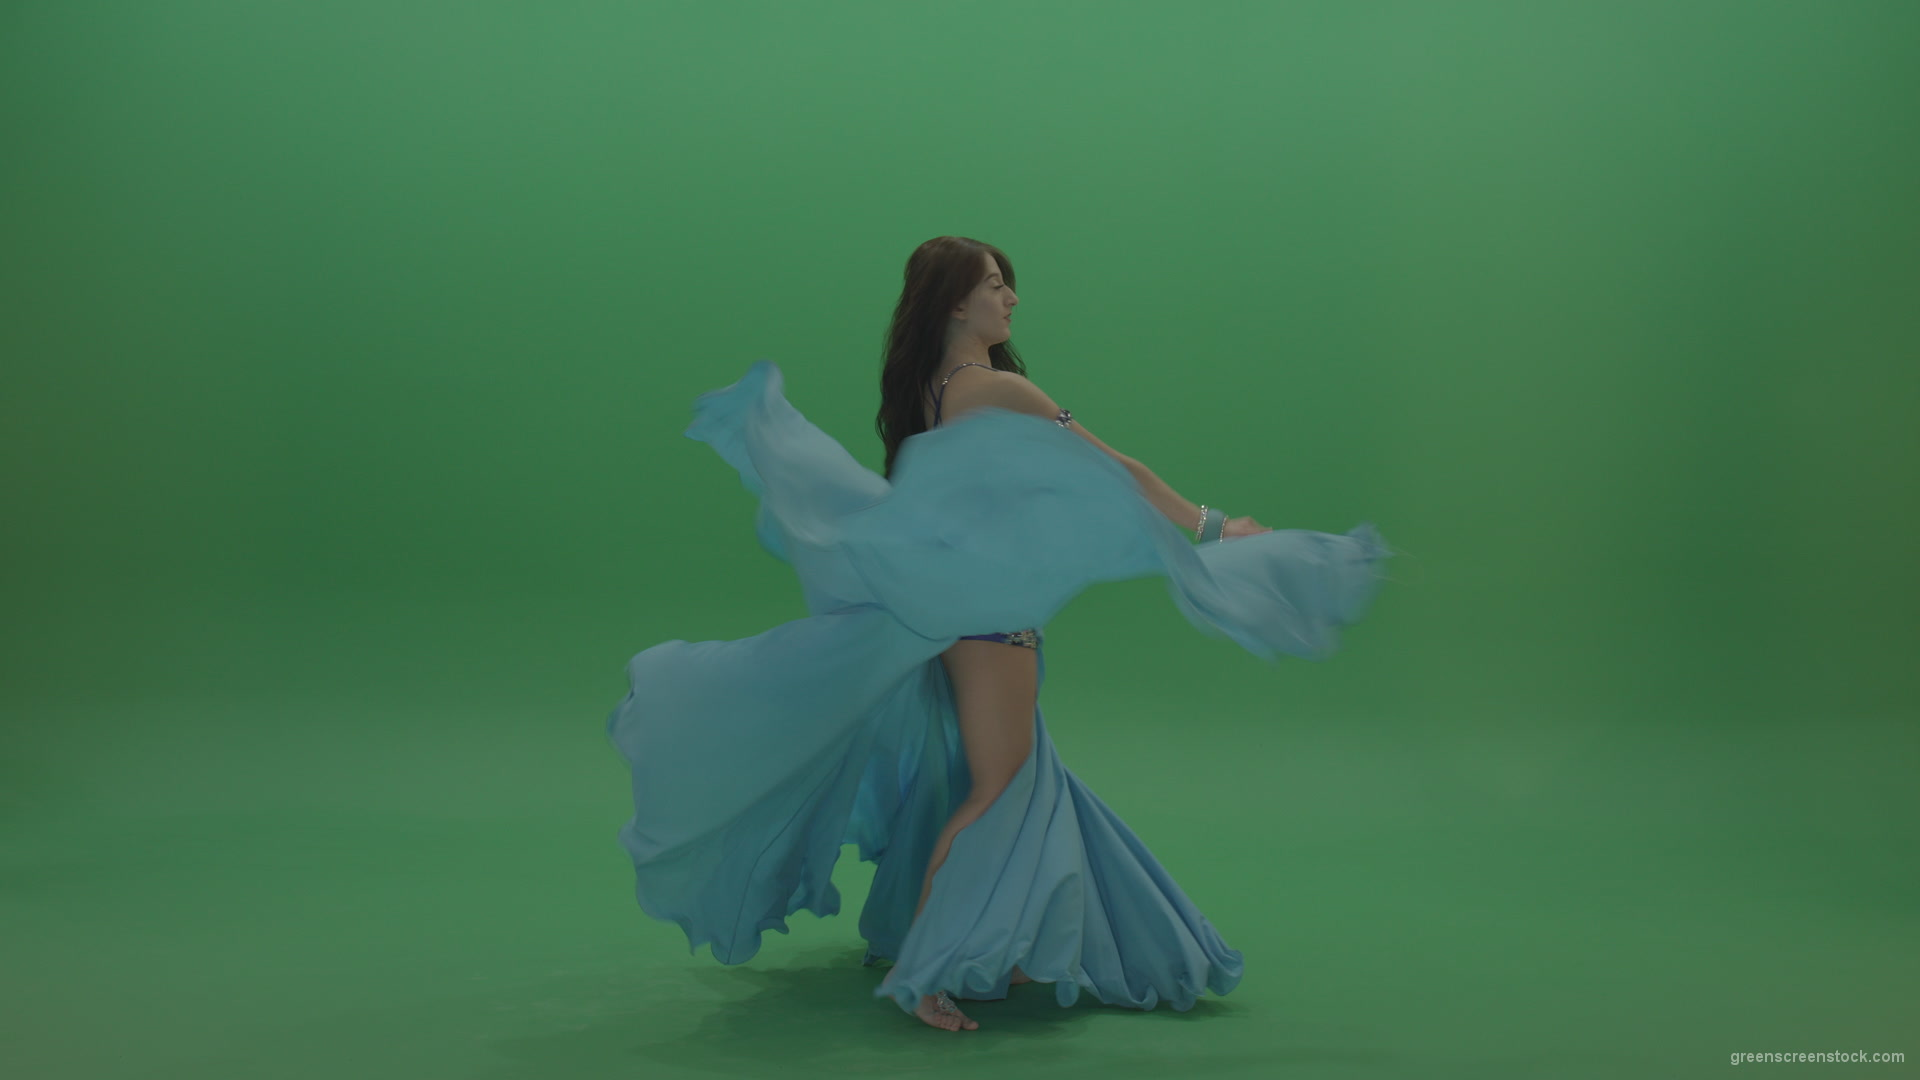 Fair-belly-dancer-in-blue-wear-display-amazing-dance-moves-over-chromakey-background_006 Green Screen Stock